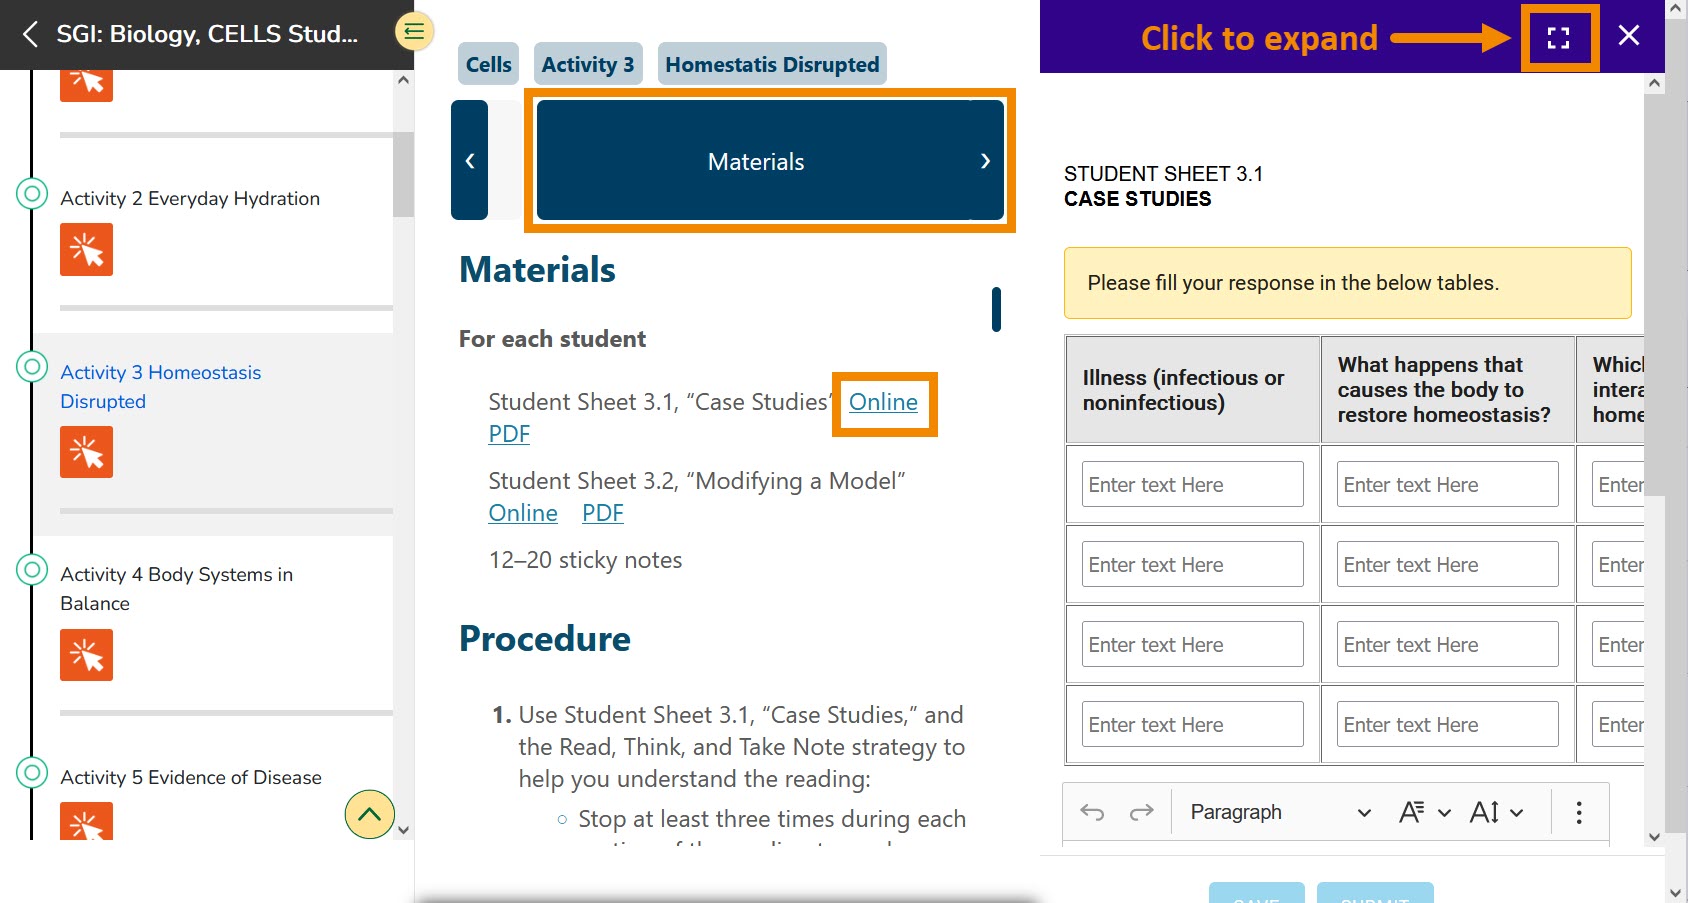 Click "Online" next to each student sheet to open in a new side-by-side window. Maximize the window by clicking the box in the top right of the student sheet.